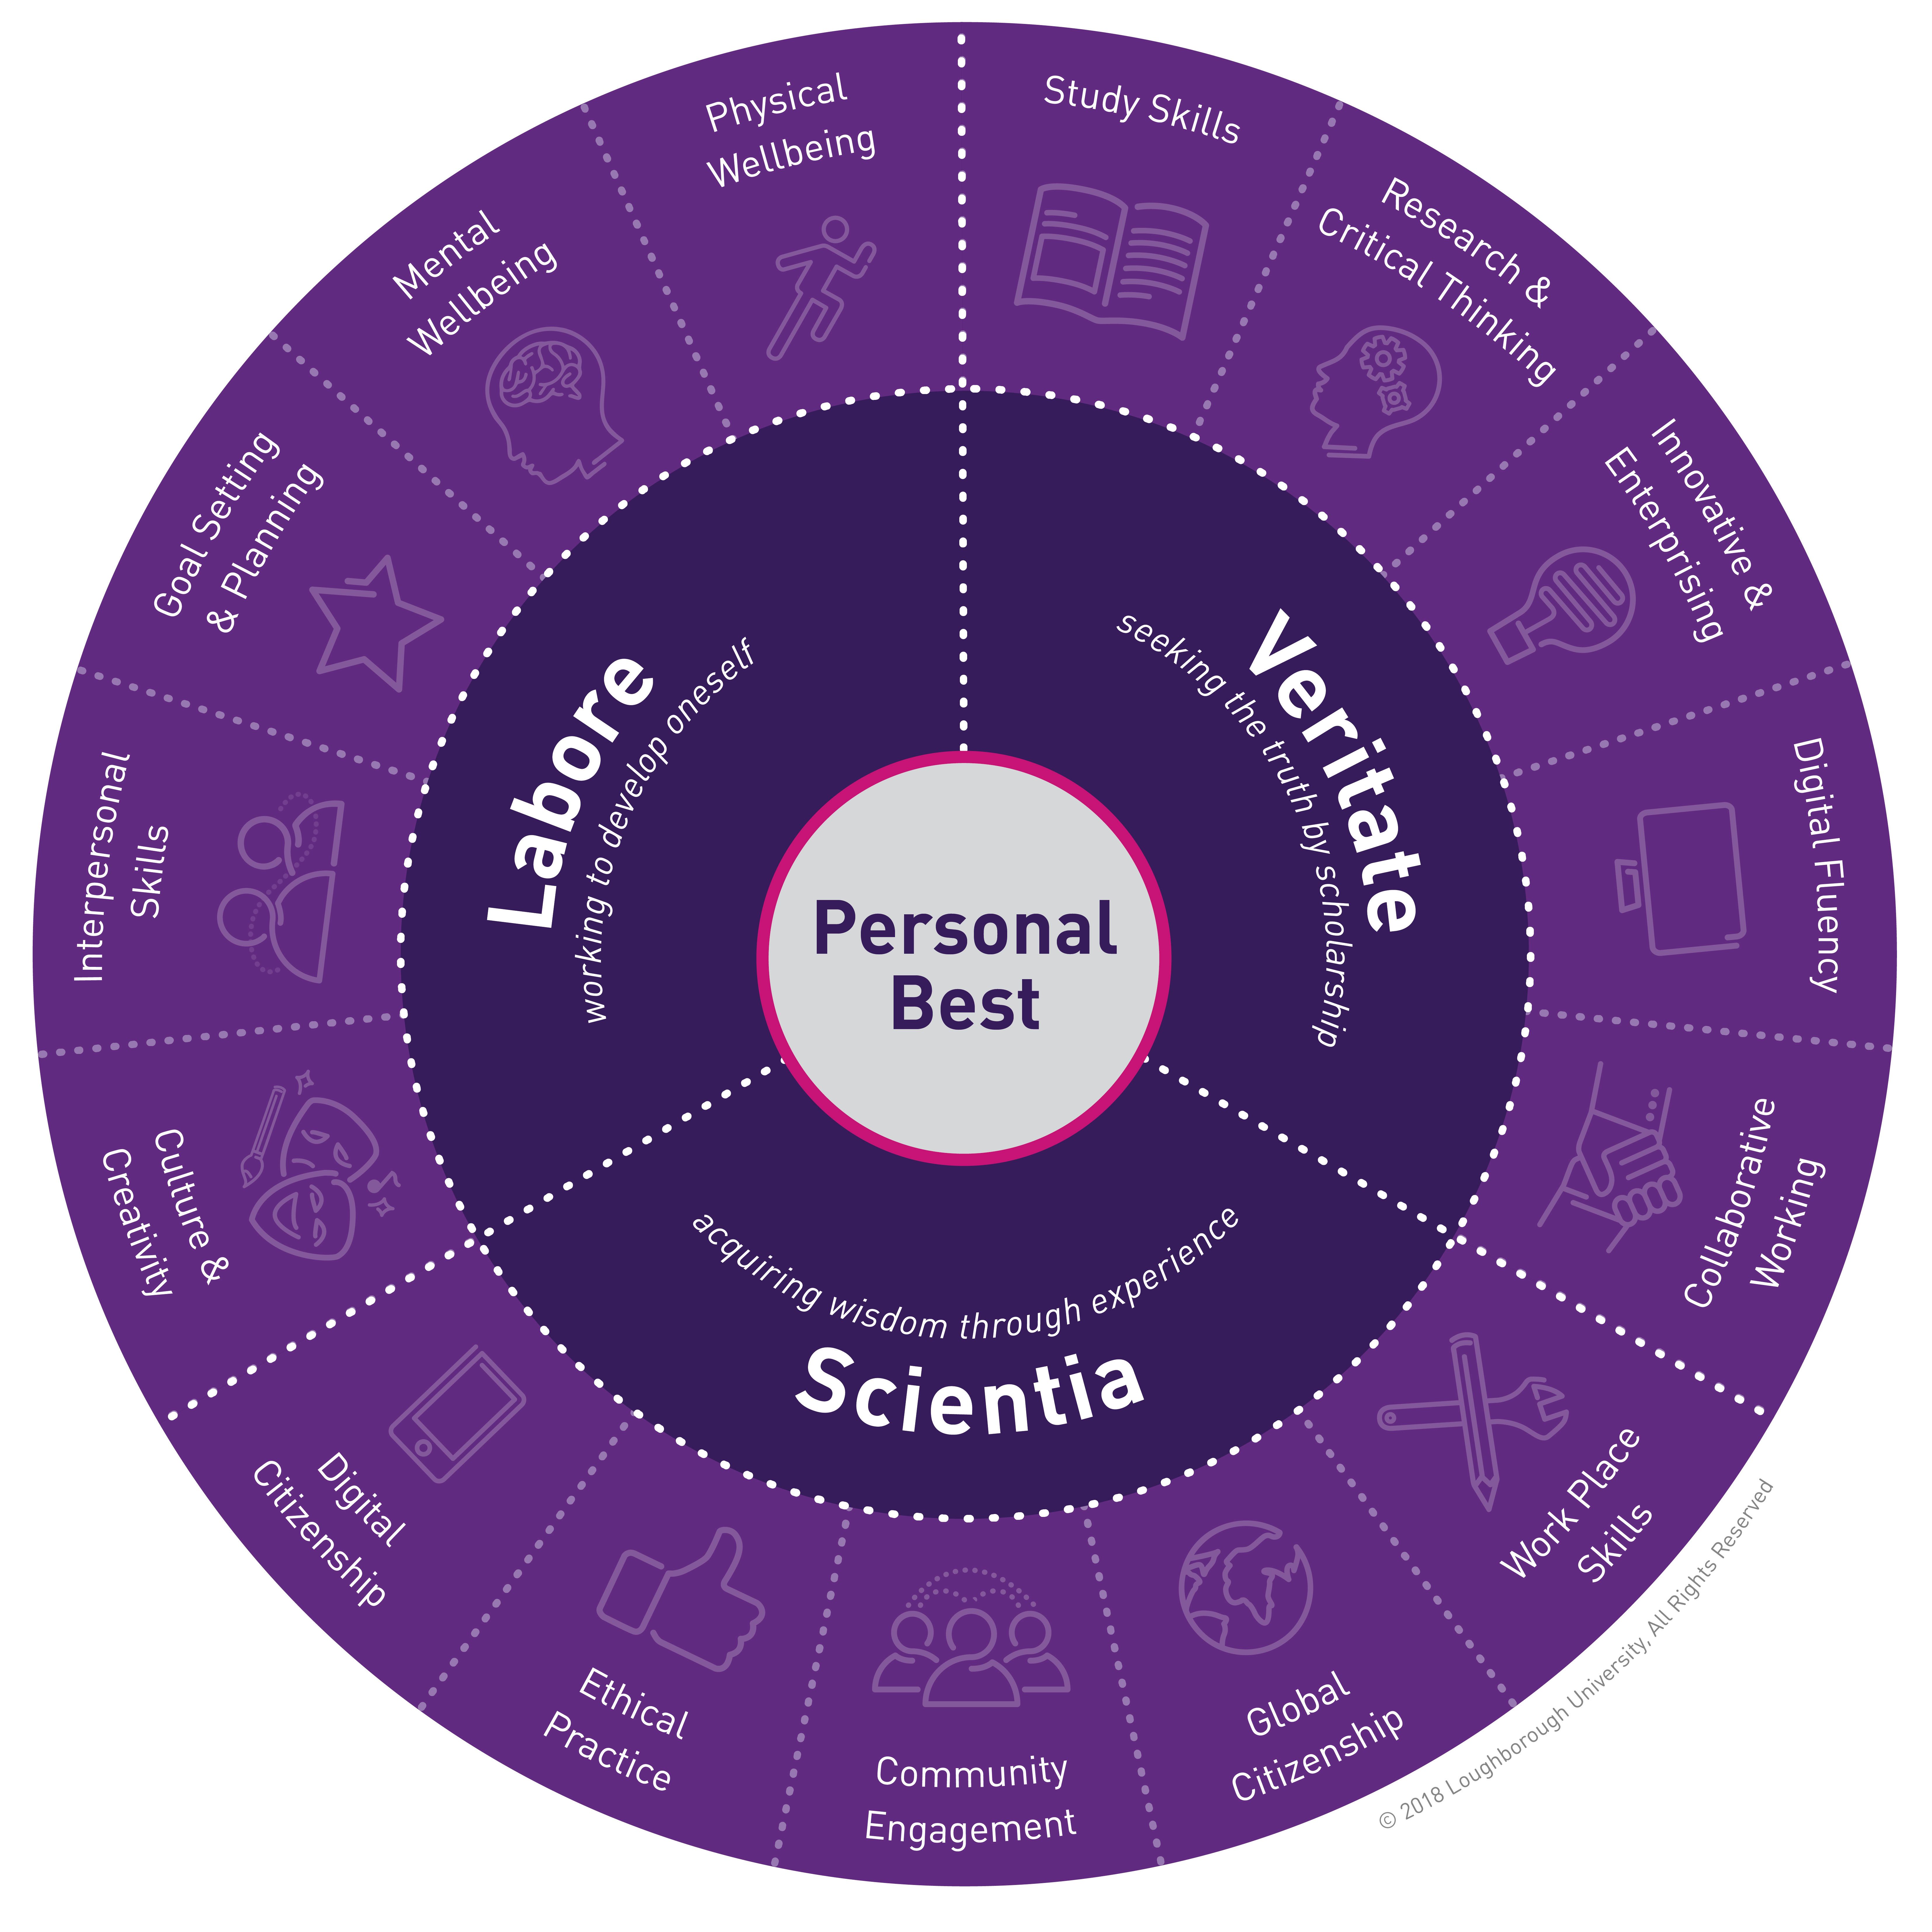 graphic illustrating the 15 skills of the Personal Best scheme within a wheel